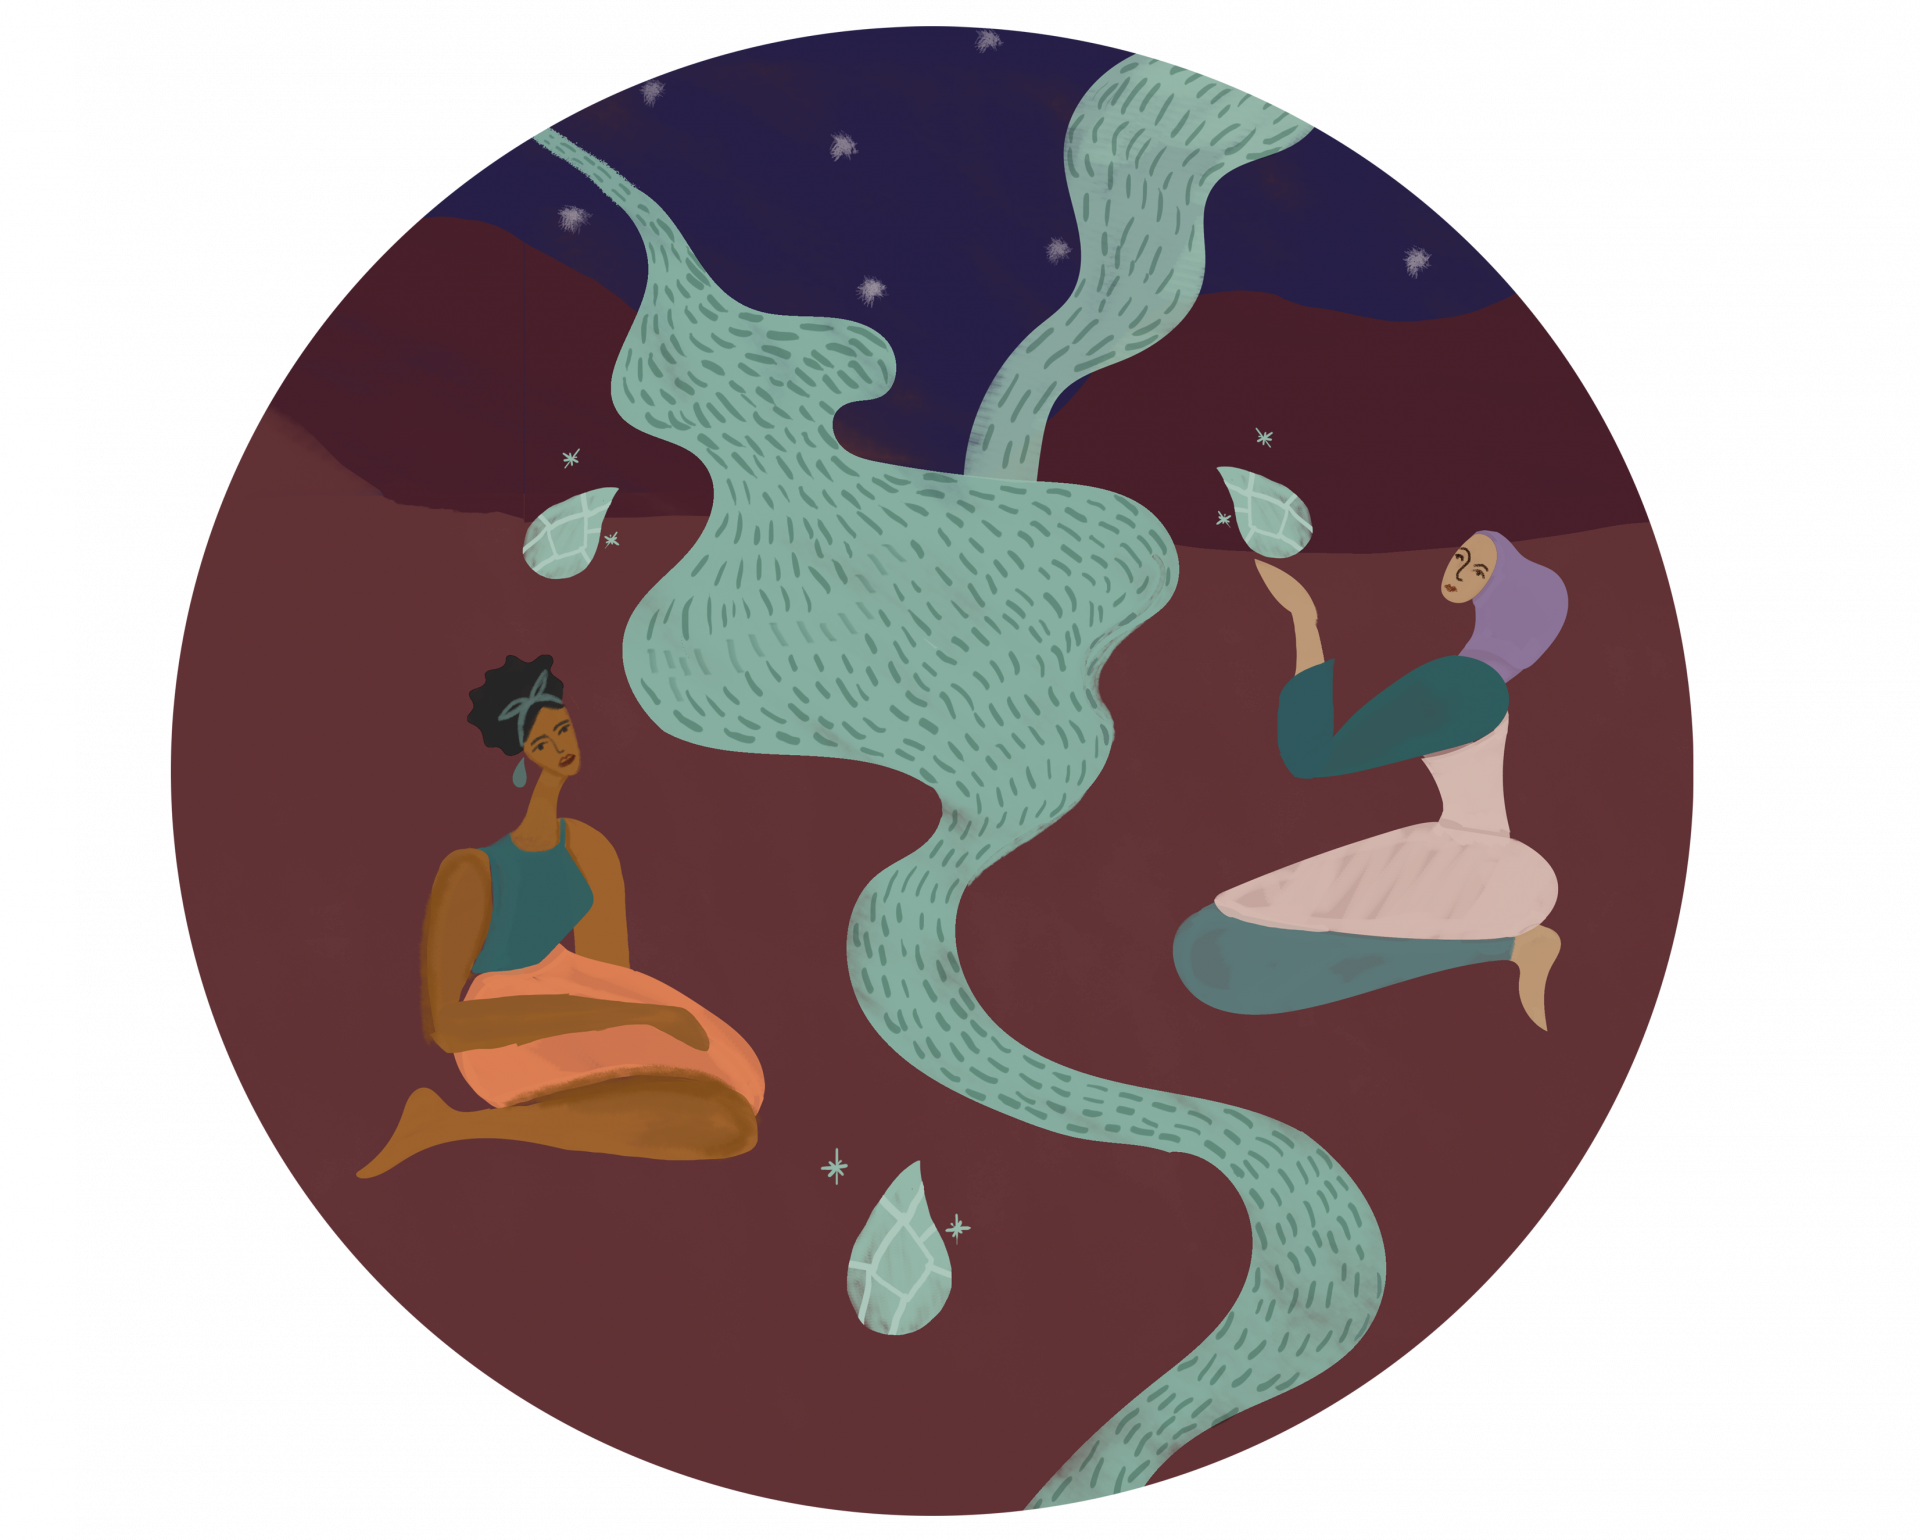 Snippet of illustration by Radhika Gupta: two women sitting on each side of a river